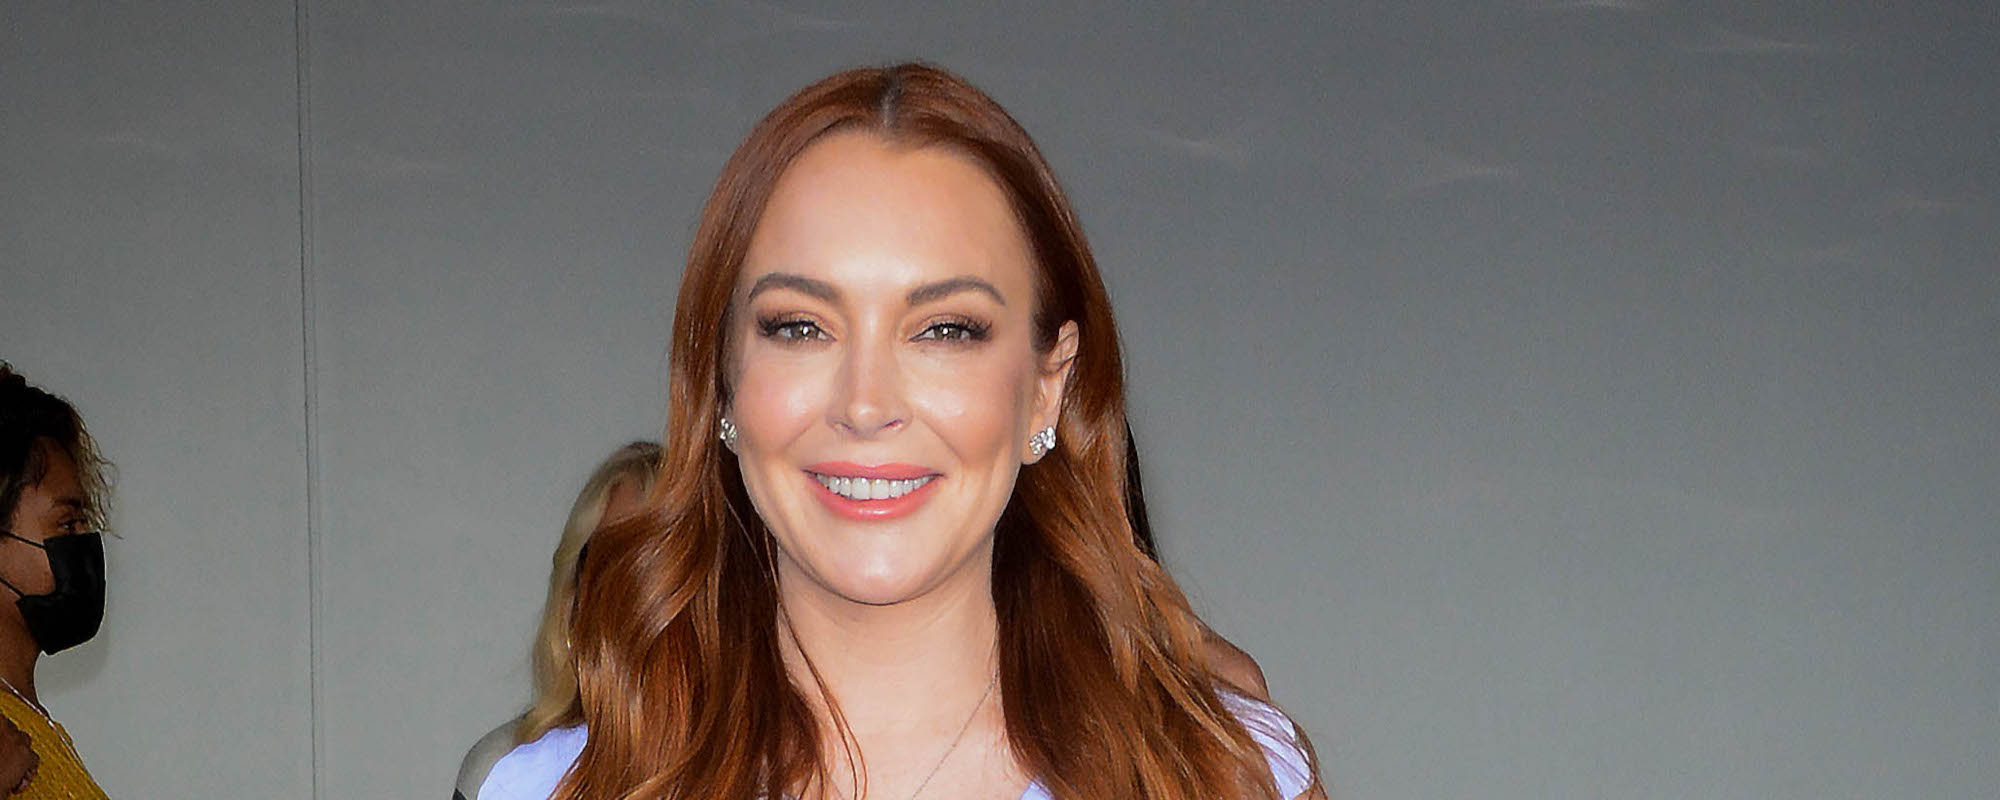 Lindsay Lohan Has New Music That’s in “Waiting,” Sister Aliana’s Song “Without You” Featured in New Netflix Film